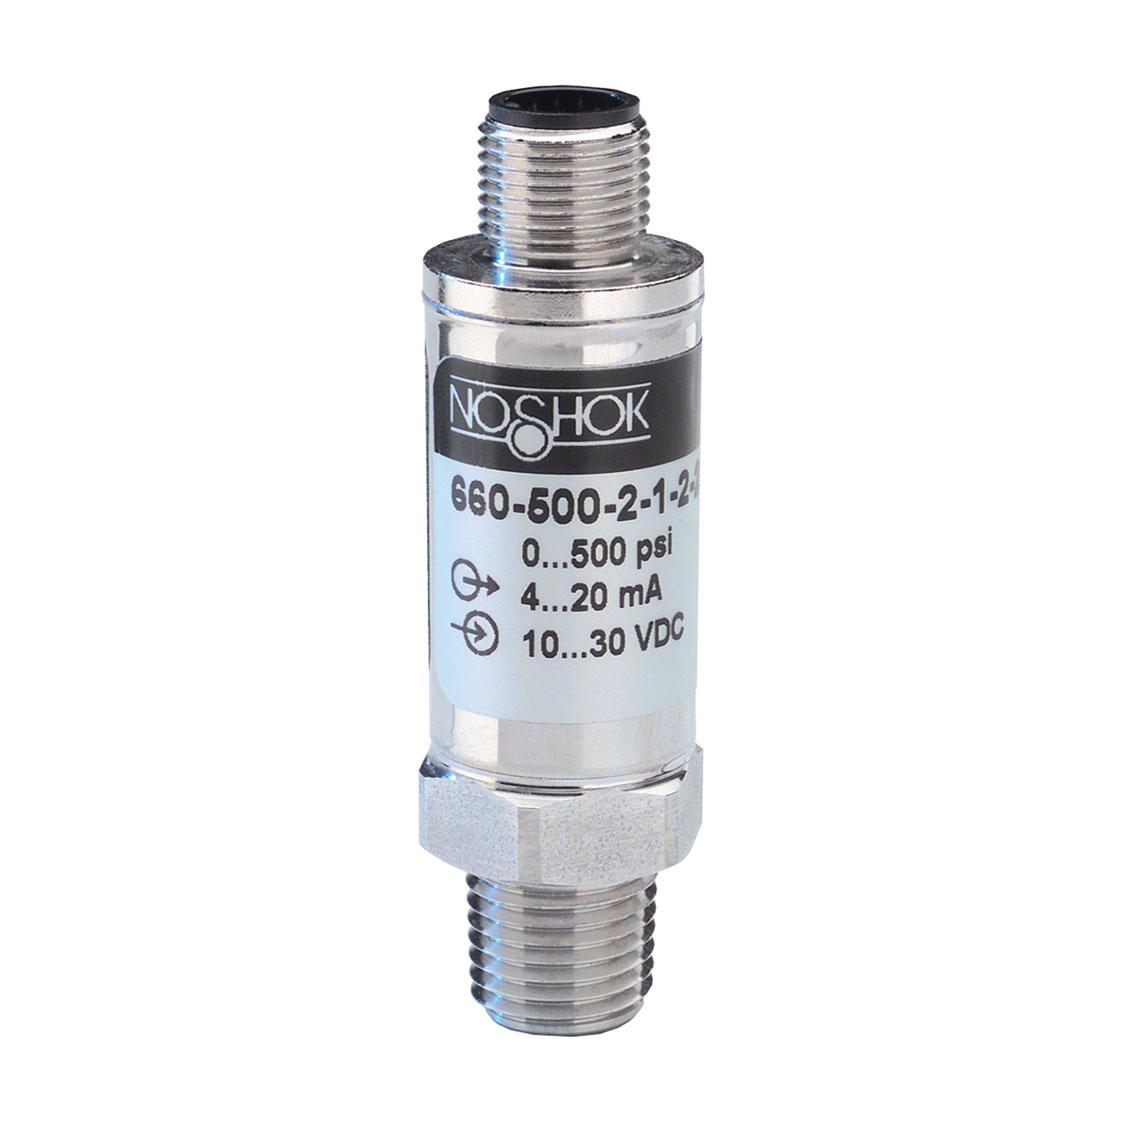 Noshok 660-500-1-1-2-25 0 to 500 psig, 0.25% Accuracy (Best Fit Straight Line (BFSL)), 4 to 20 mA Output, 1/4'' National Pipe Thread (NPT) Male Pressure Transducer with M12 x 1 (4 Pin)